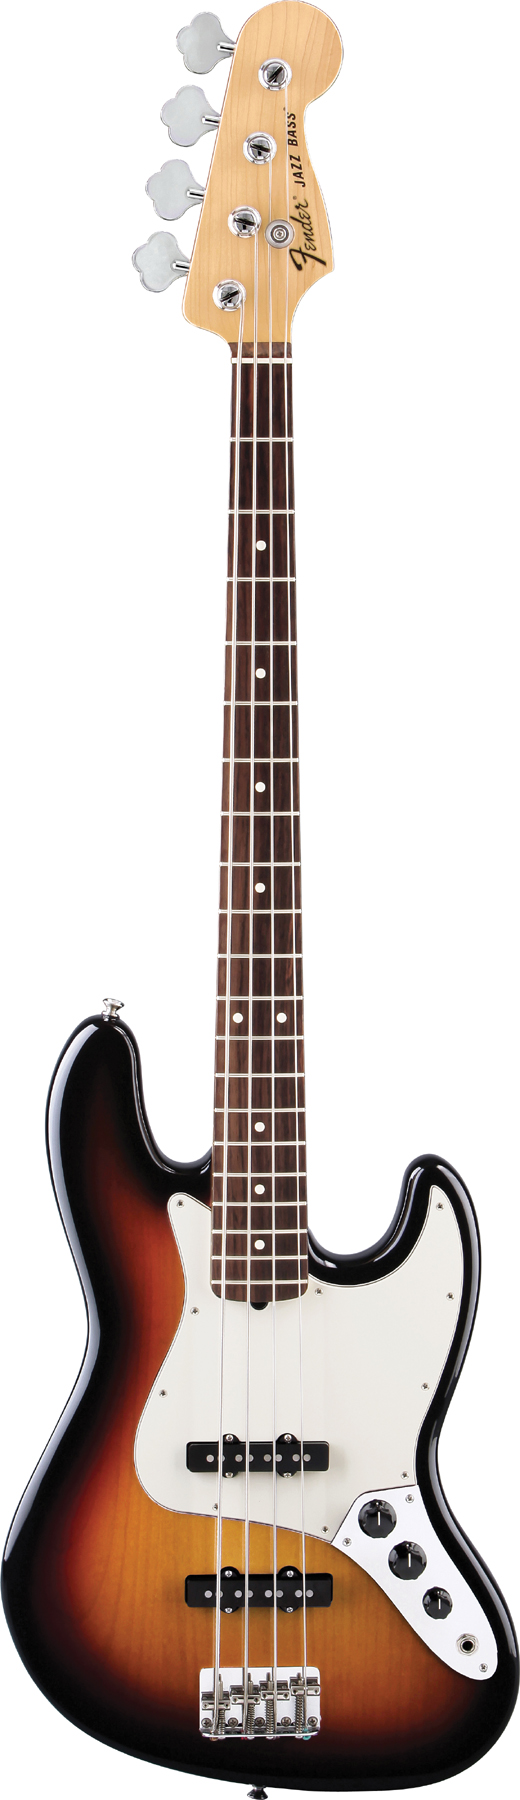 American Special Jazz Bass